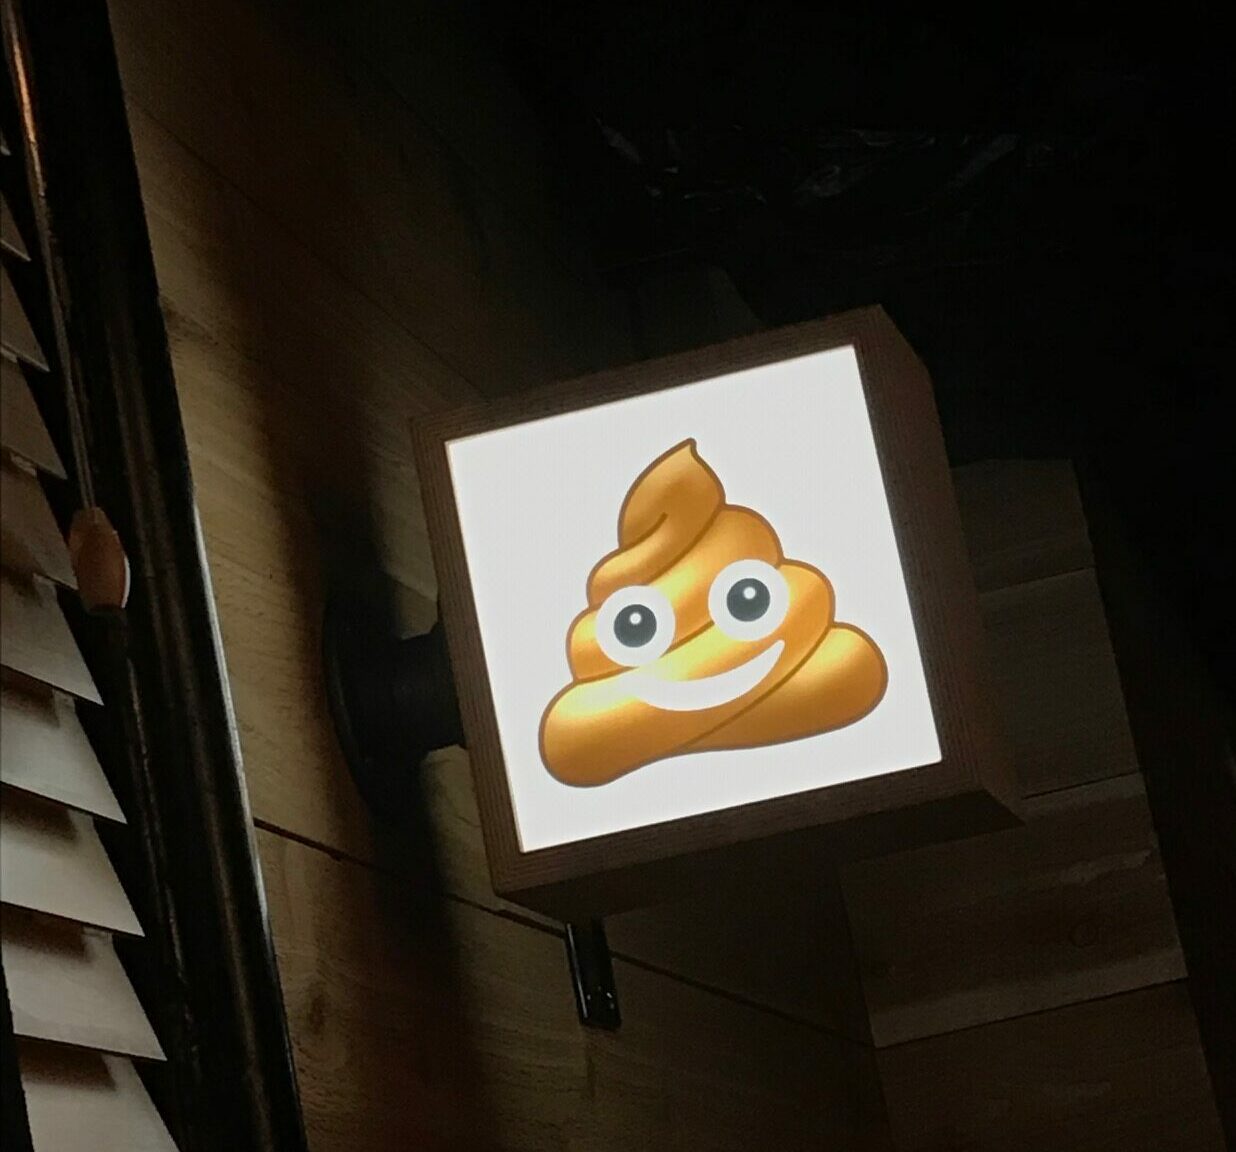 A lit-up "poop emoji" sign shows the way to the bathroom.